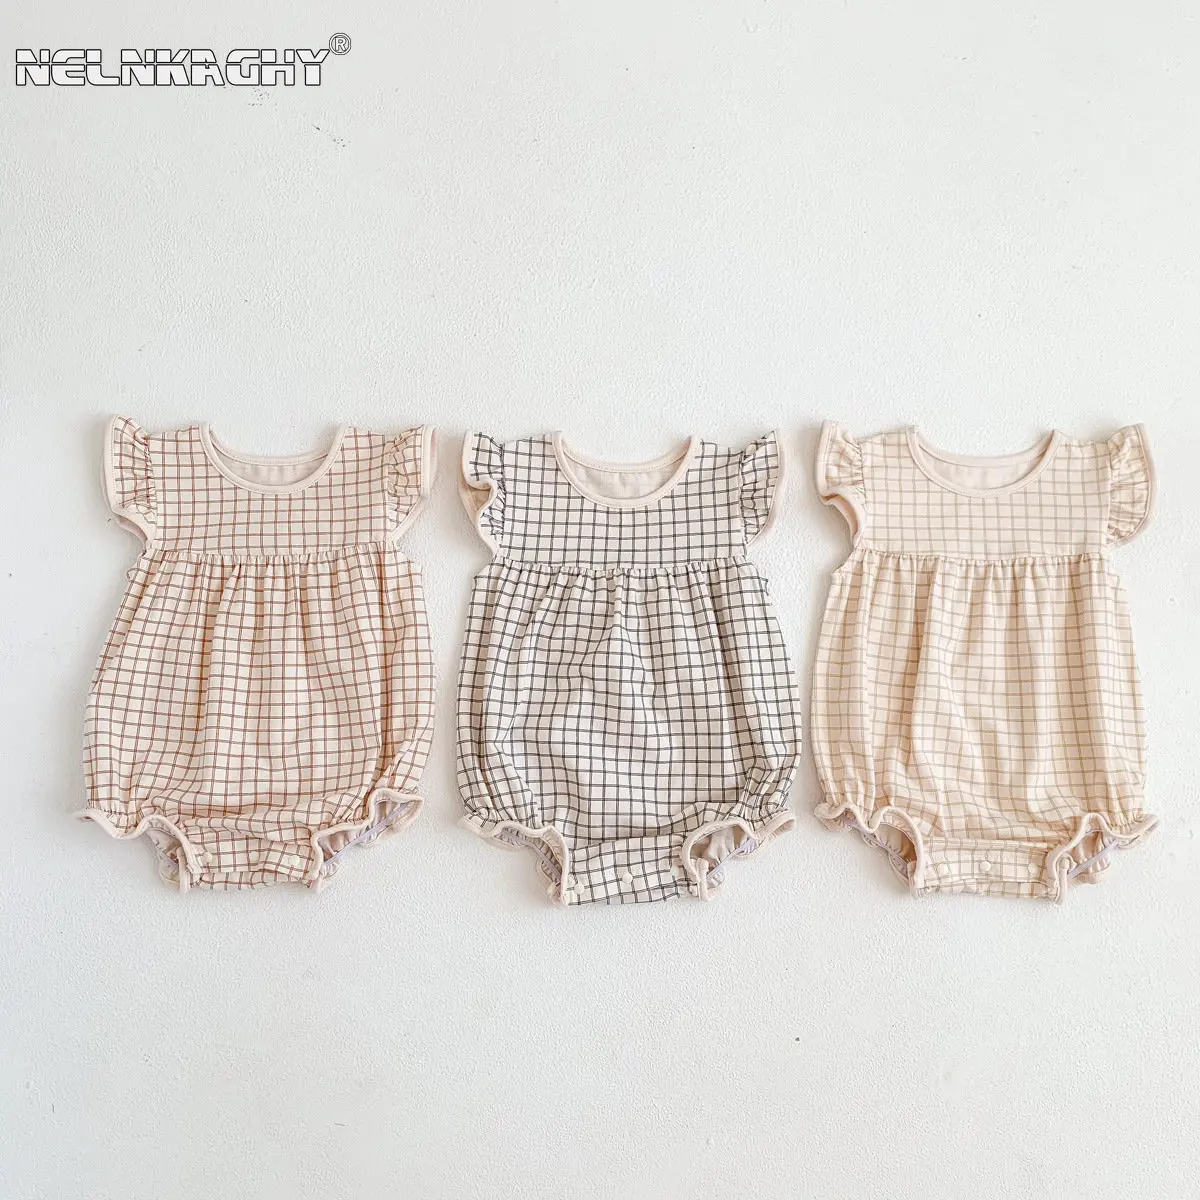 2023 NEW IN Summer Infant Kids Girls Fly Sleeve Plaid Outwear Outfits Newborn Baby Cotton Clothing Casual Bodysuits Jumpsuits